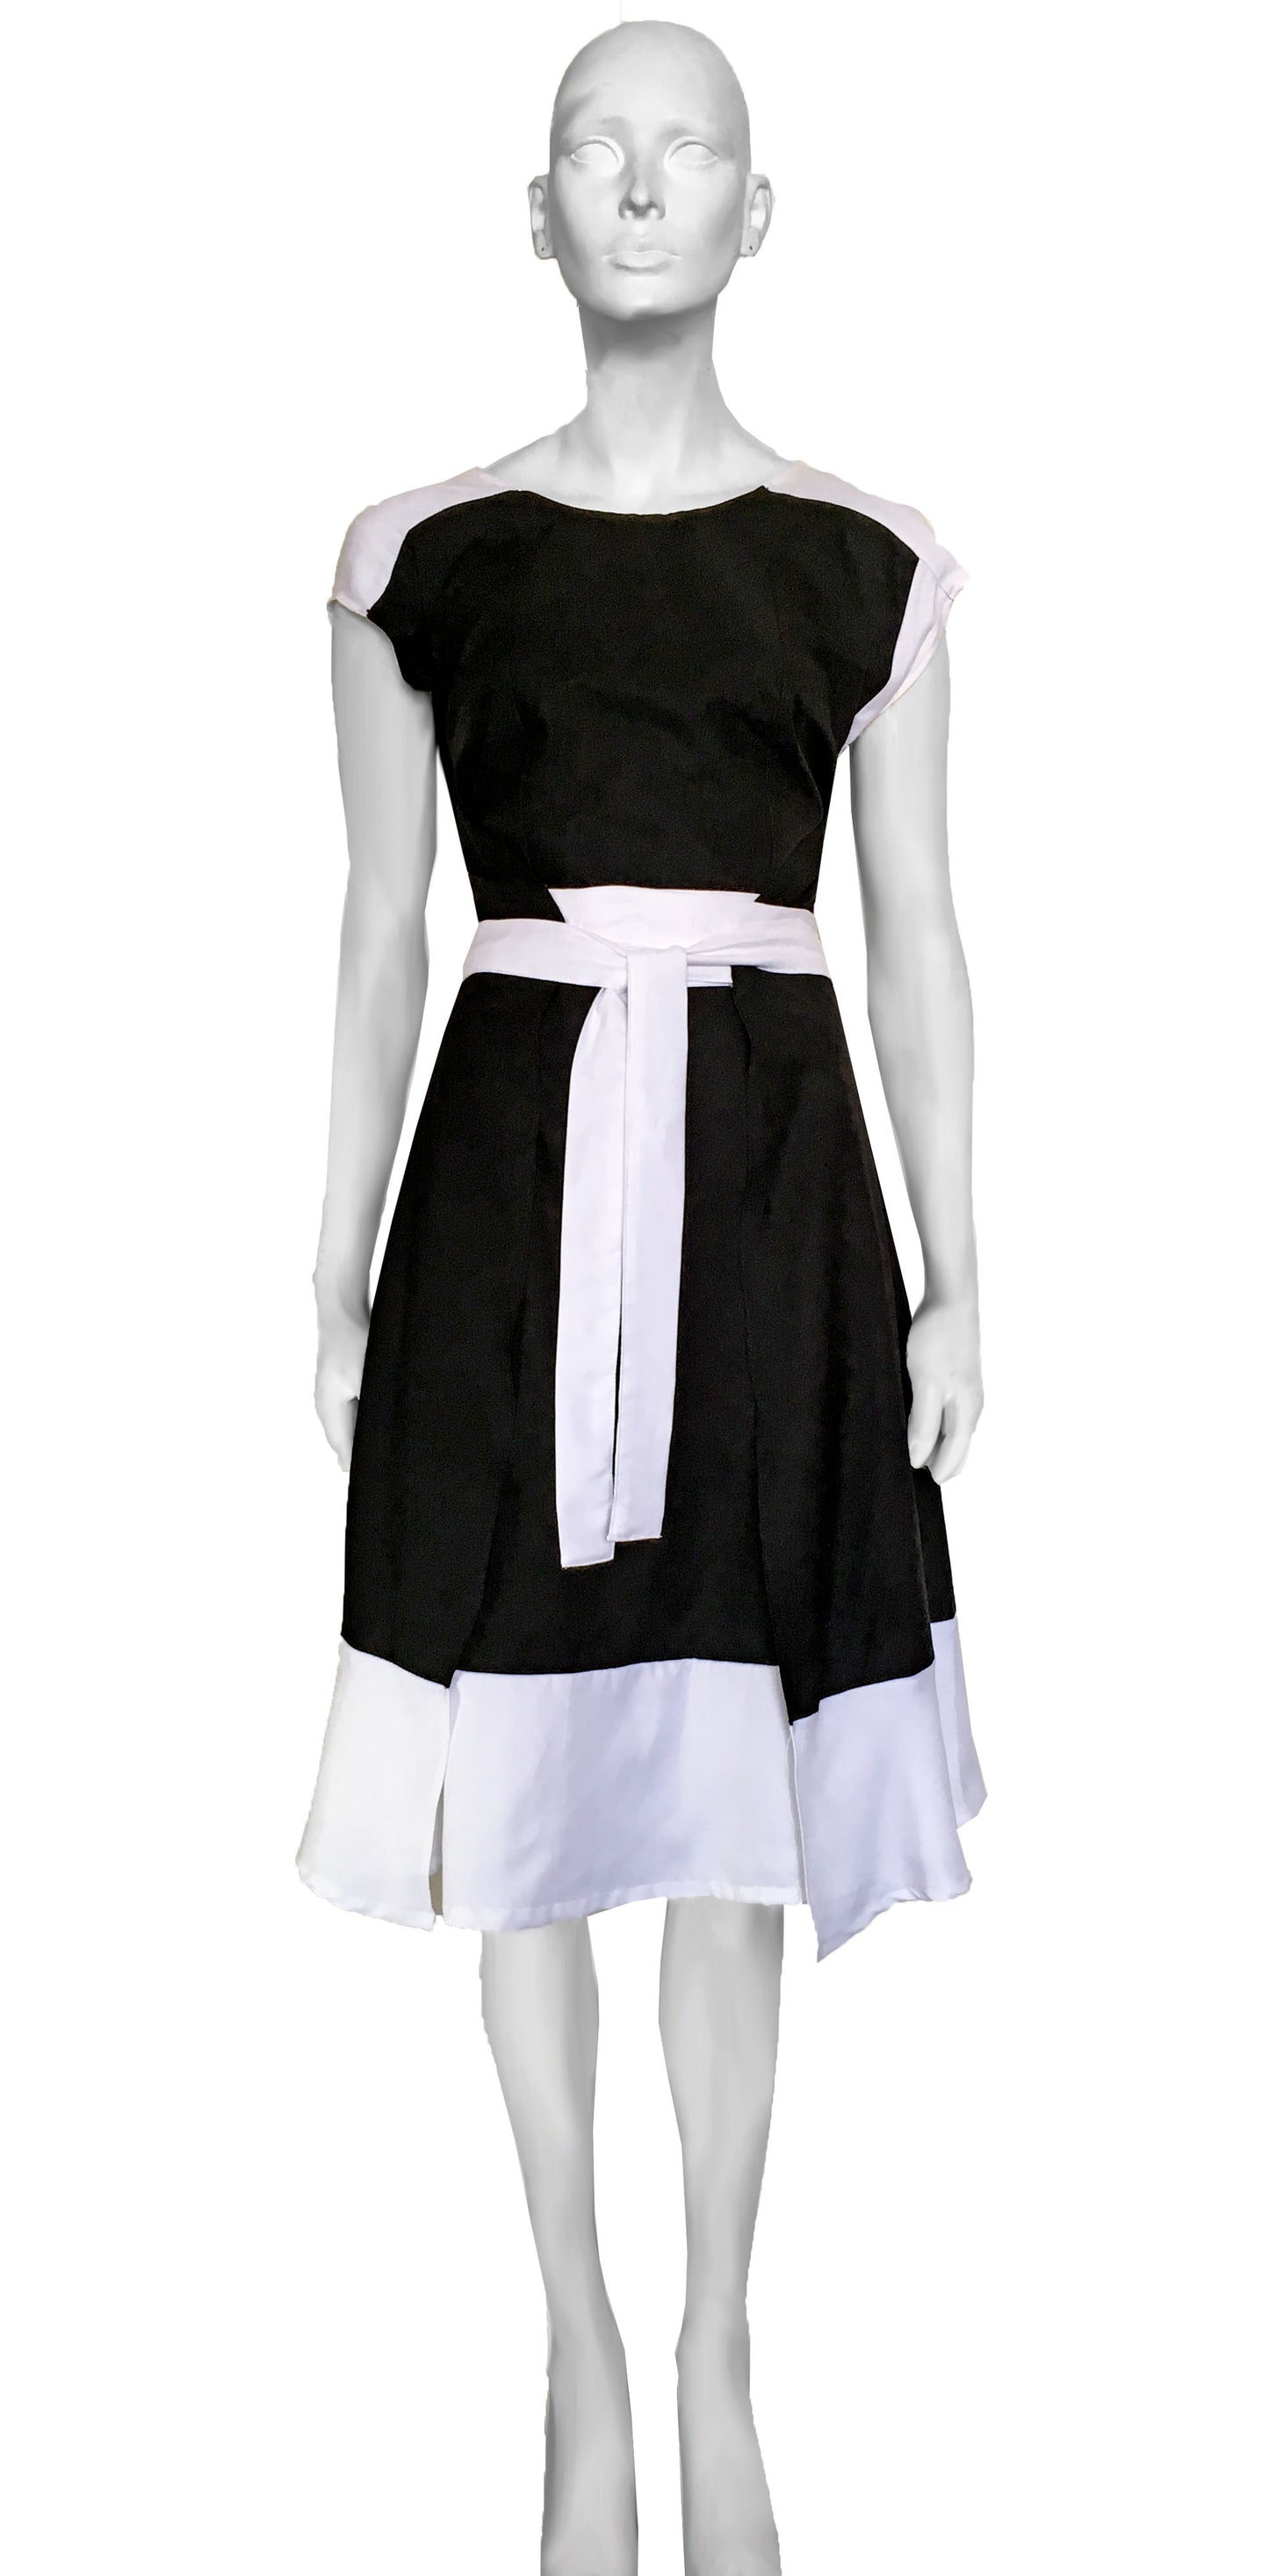 Wrap dress, two fronts, with white shoulder yoke and skirt.